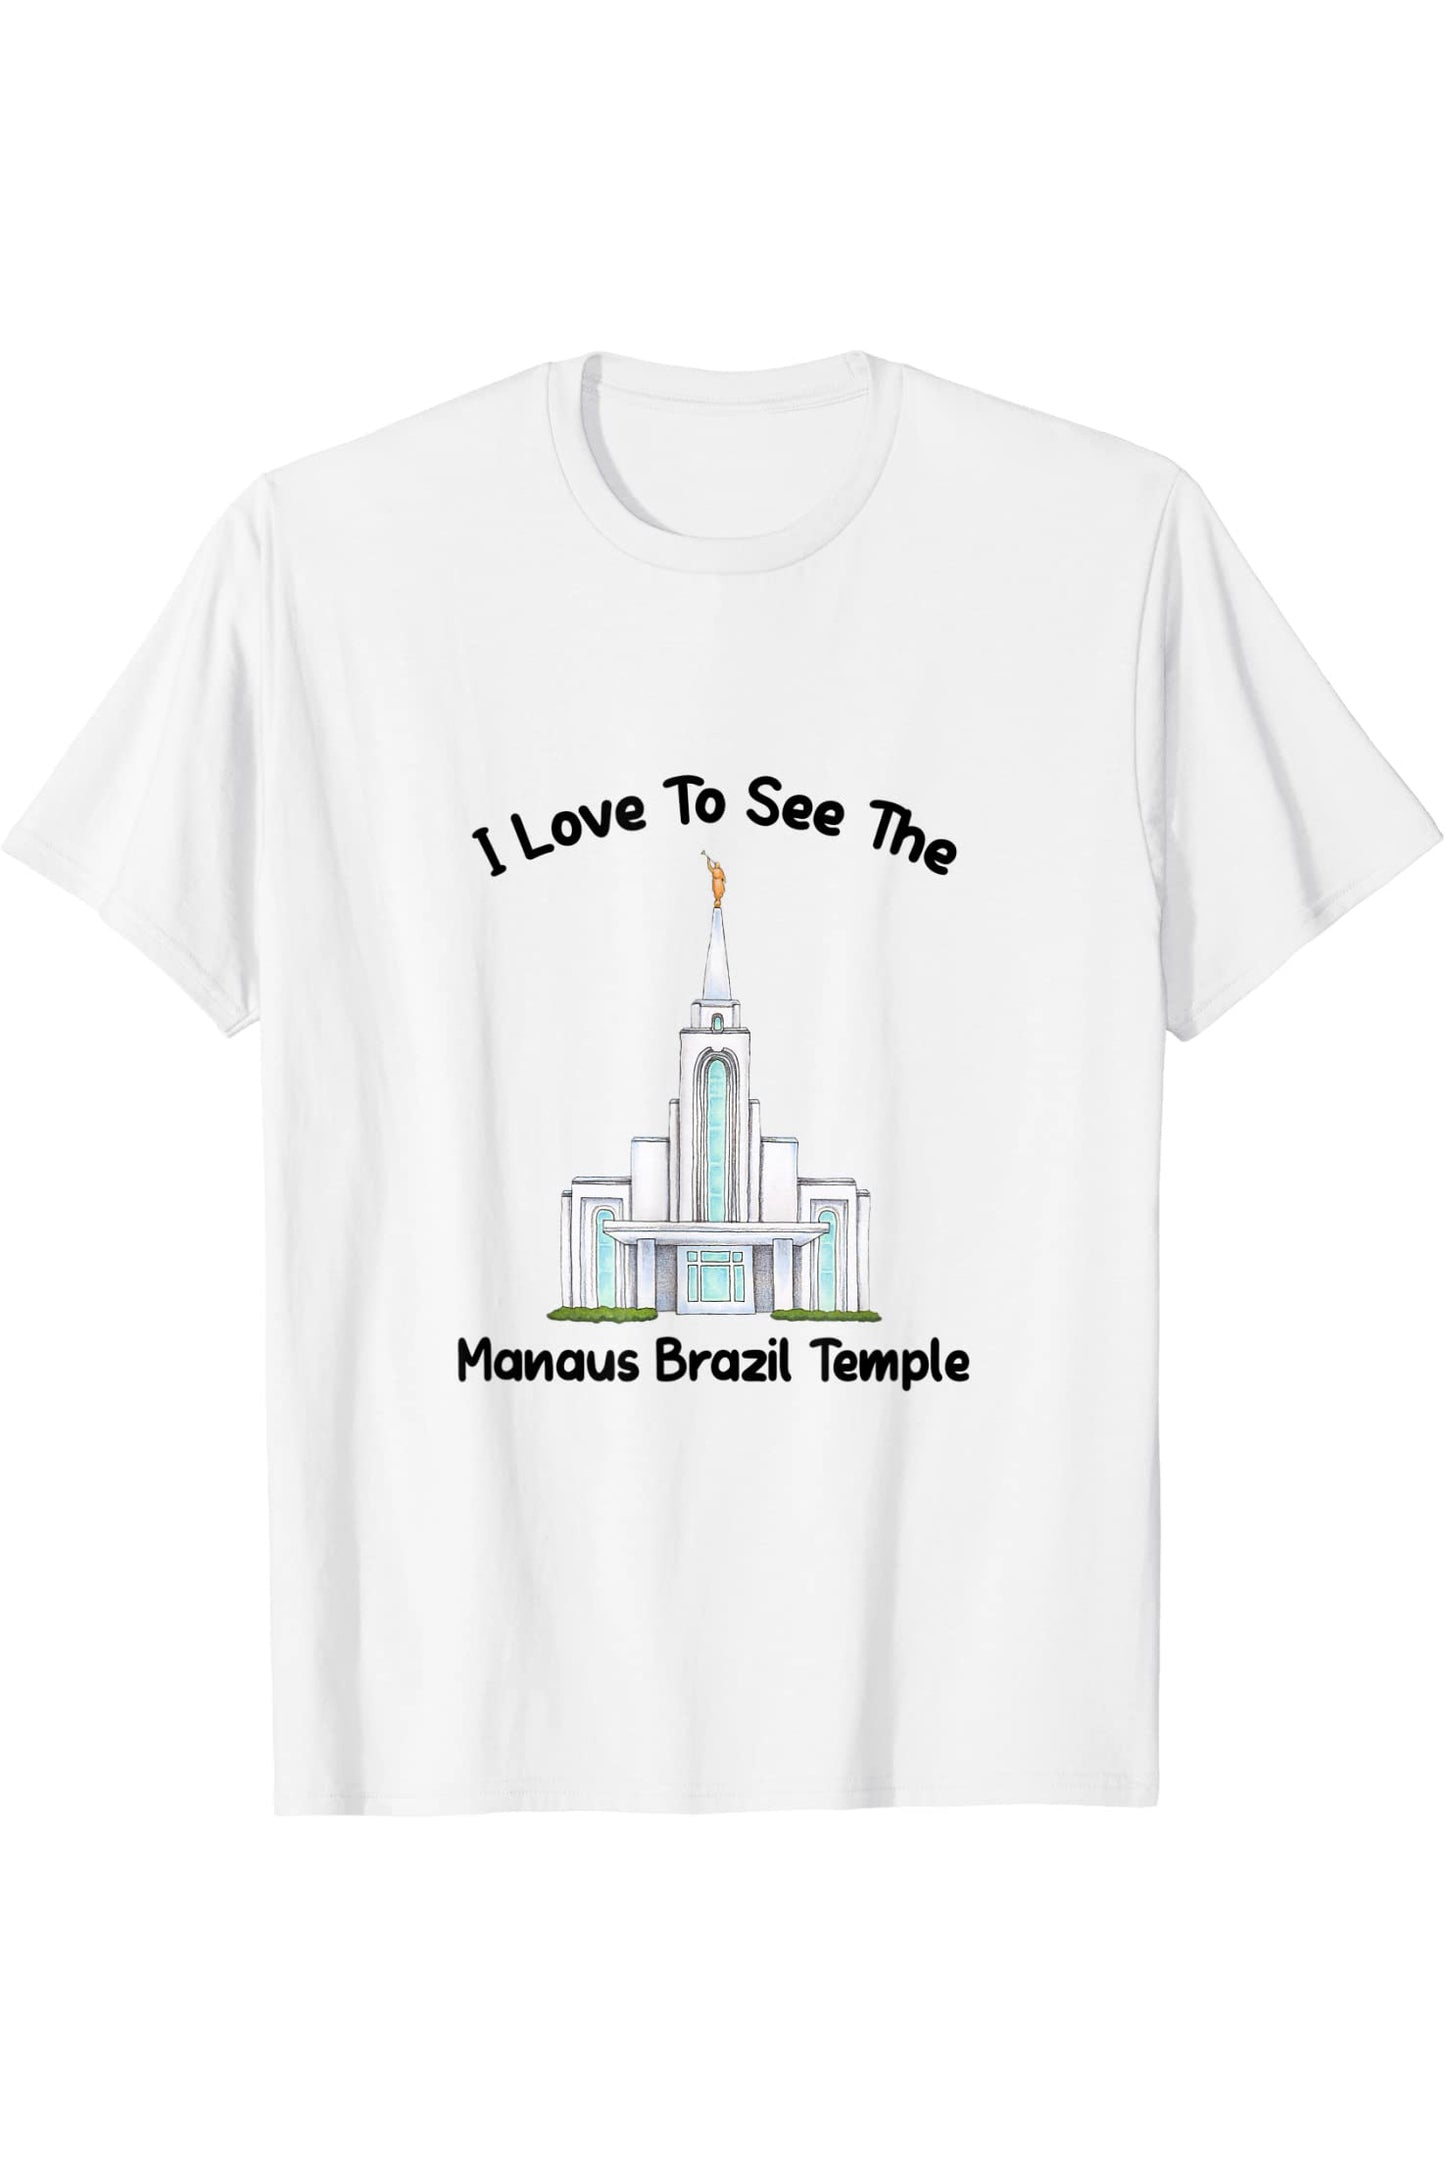 Manaus Brazil Temple T-Shirt - Primary Style (English) US